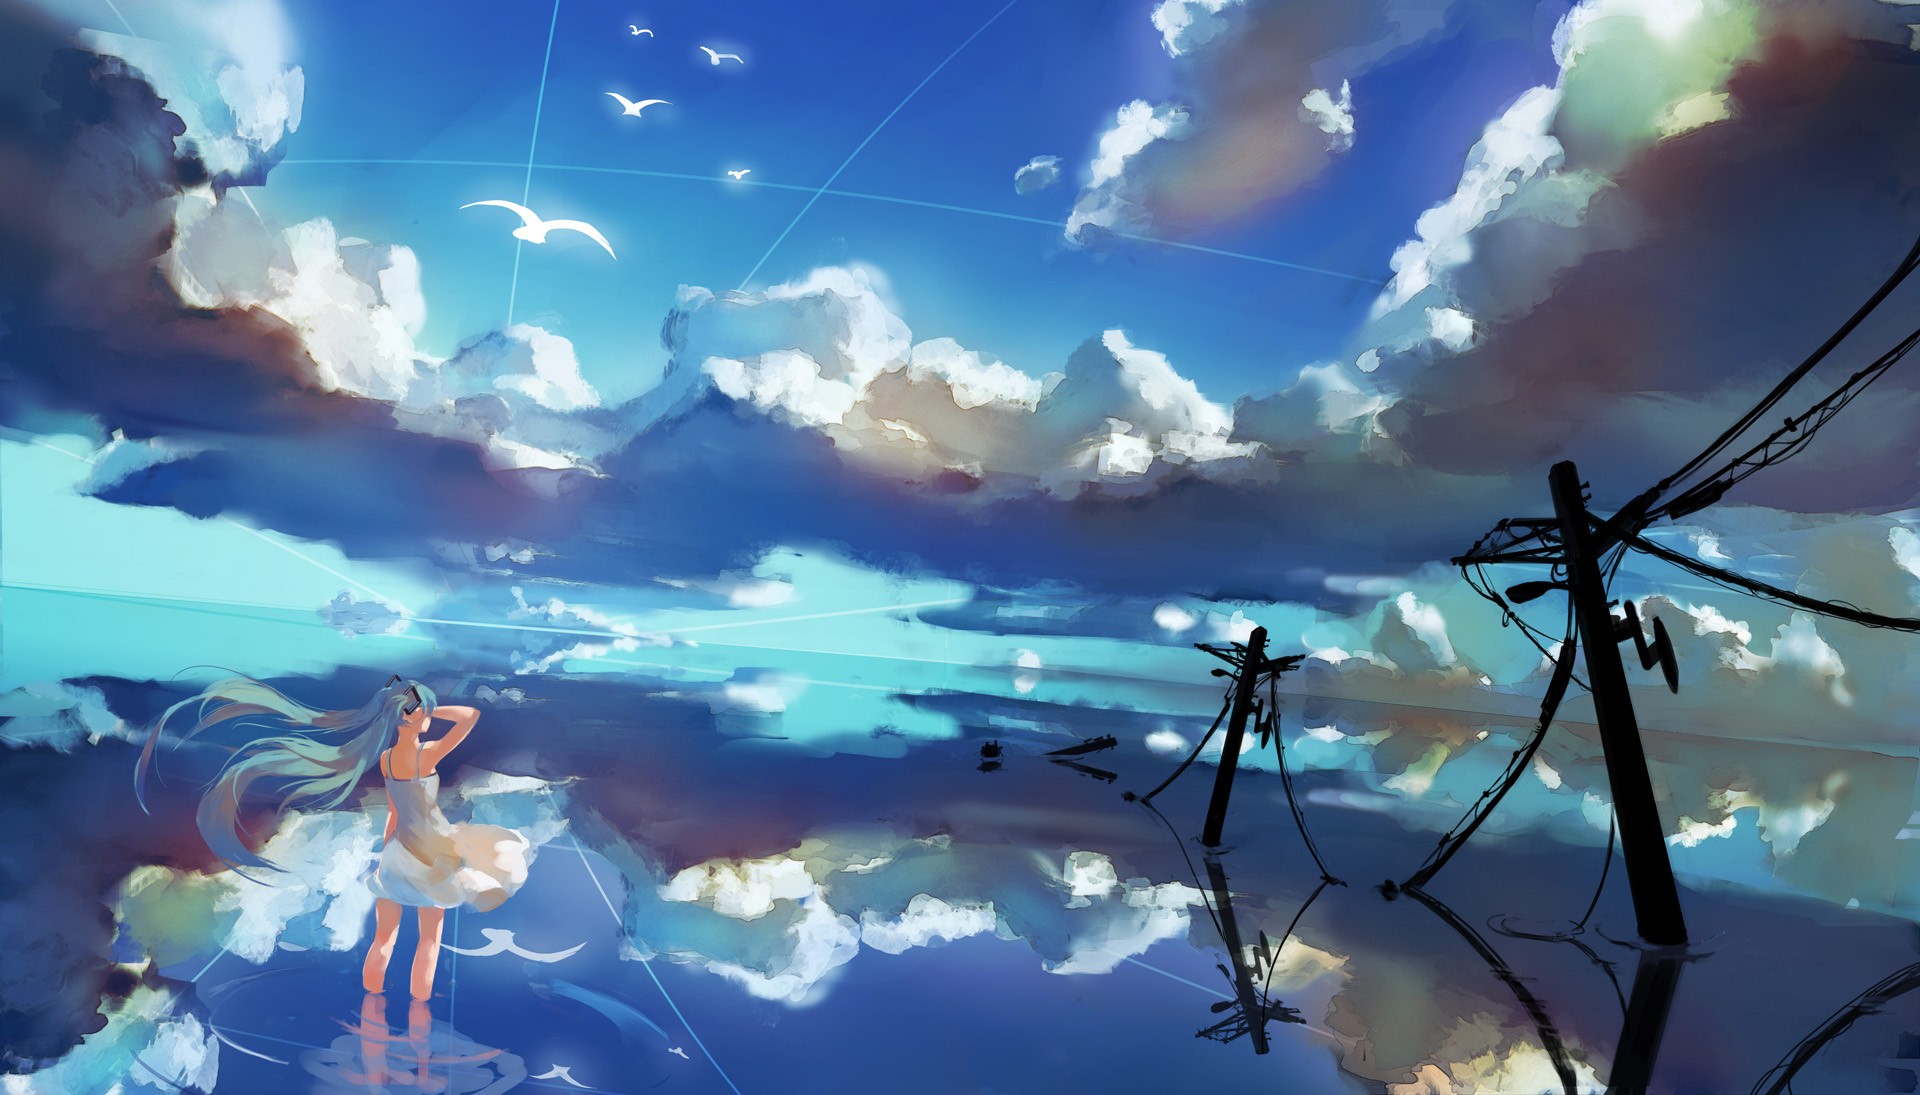 General 1920x1095 sea anime sky clouds reflection outdoors women outdoors Vocaloid Hatsune Miku long hair standing hair blowing in the wind power lines anime girls alone wind dress blue hair